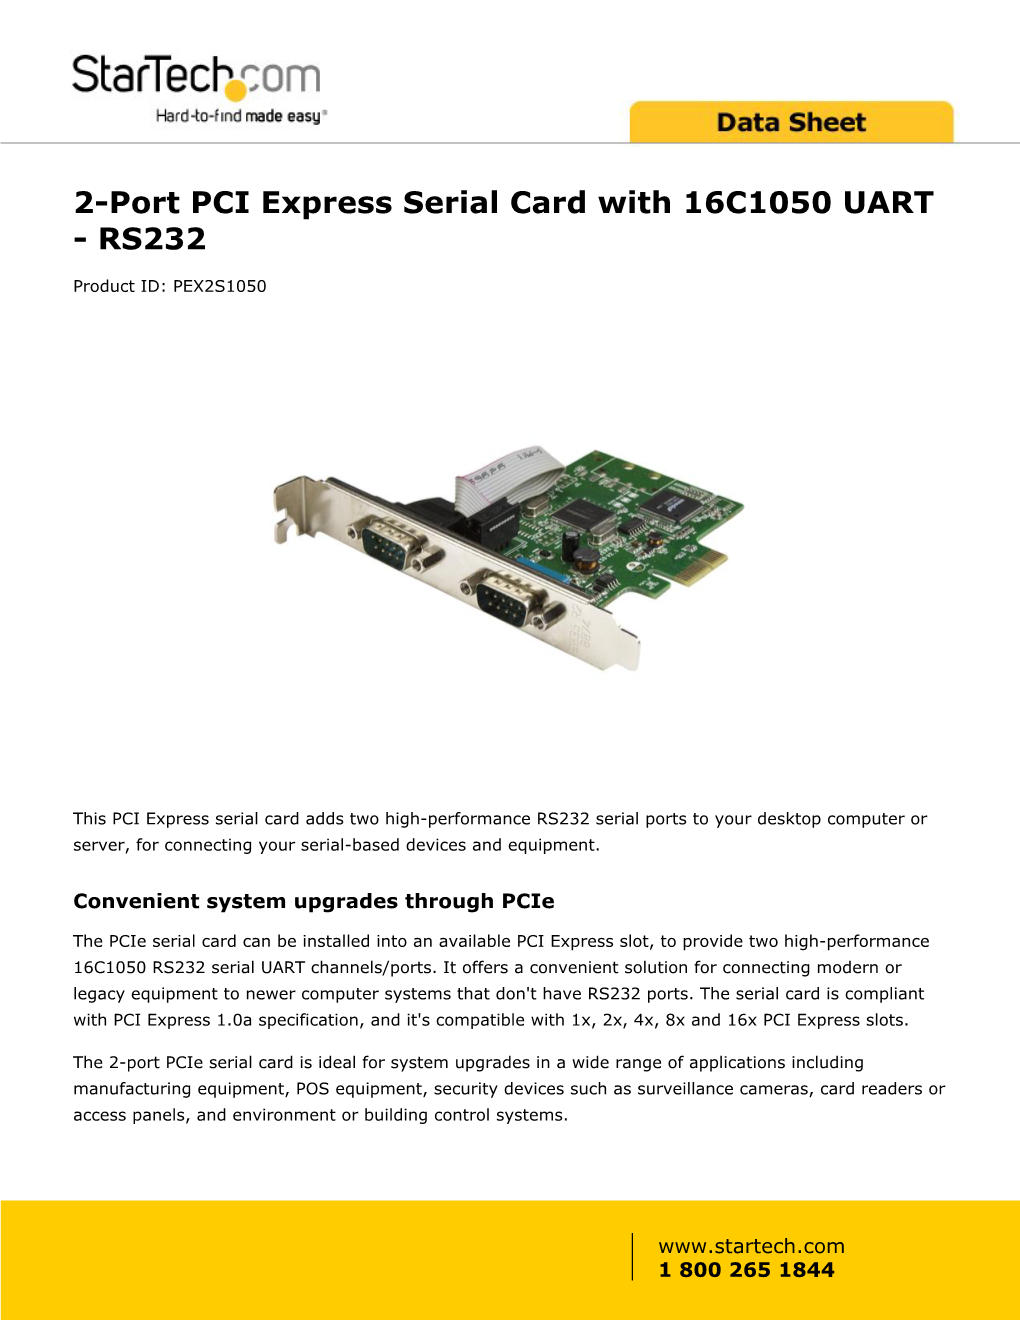 2-Port PCI Express Serial Card with 16C1050 UART - RS232